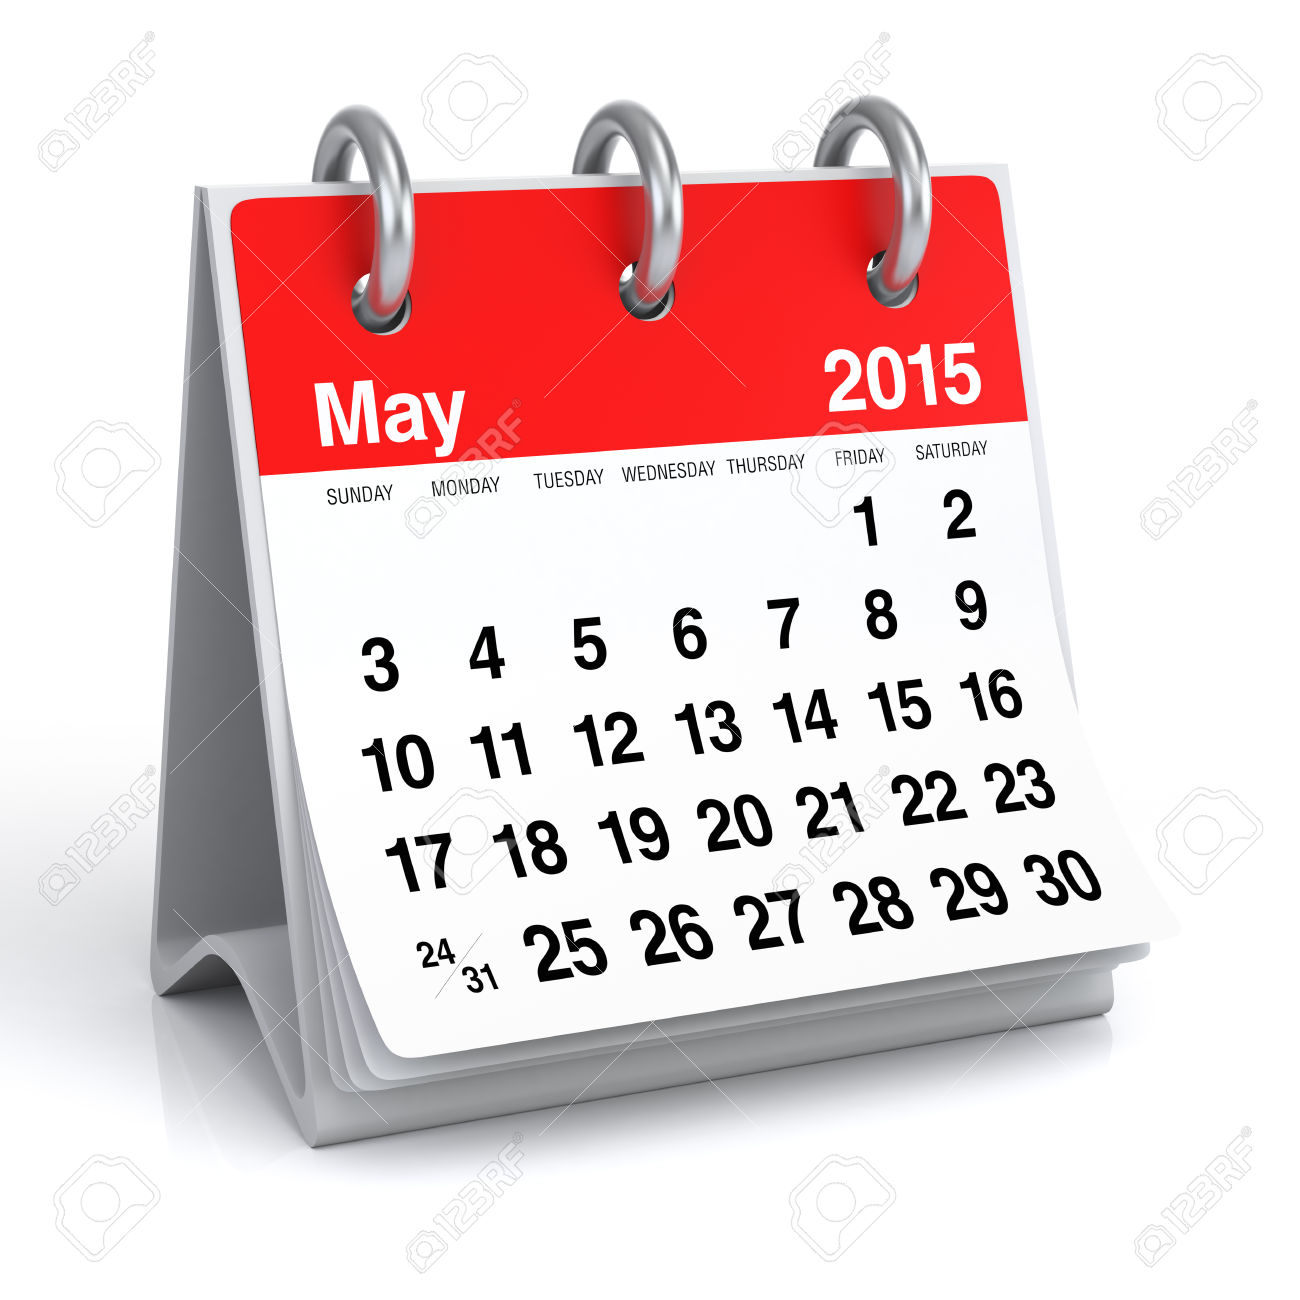 May 2015   Calendar Stock Photo Picture And Royalty Free Image